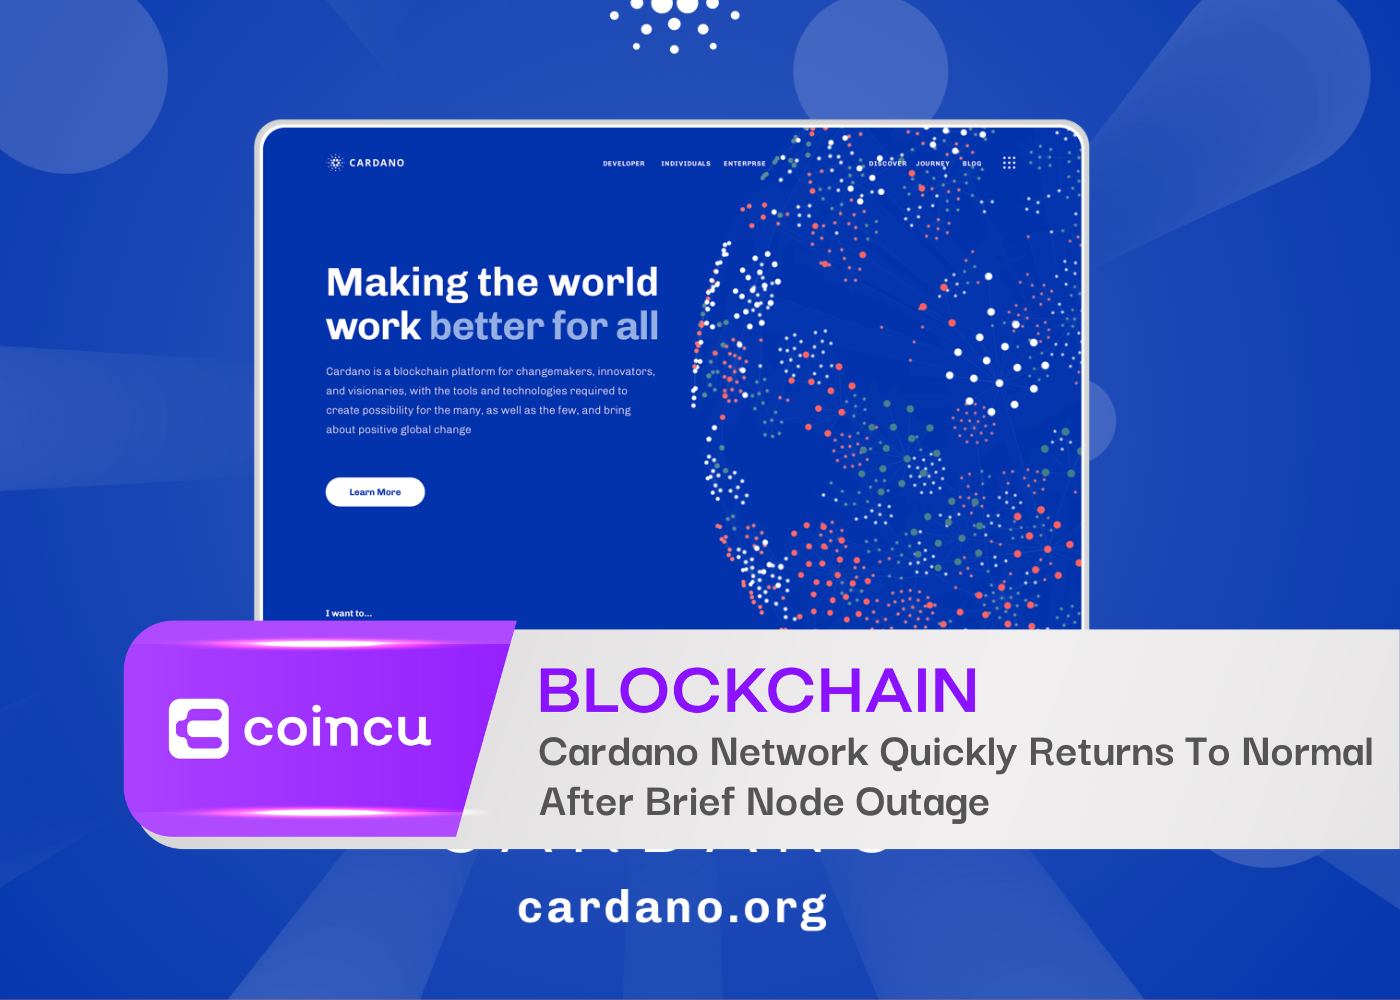 Cardano Network Quickly Returns To Normal After Brief Node Outage - CoinCu News